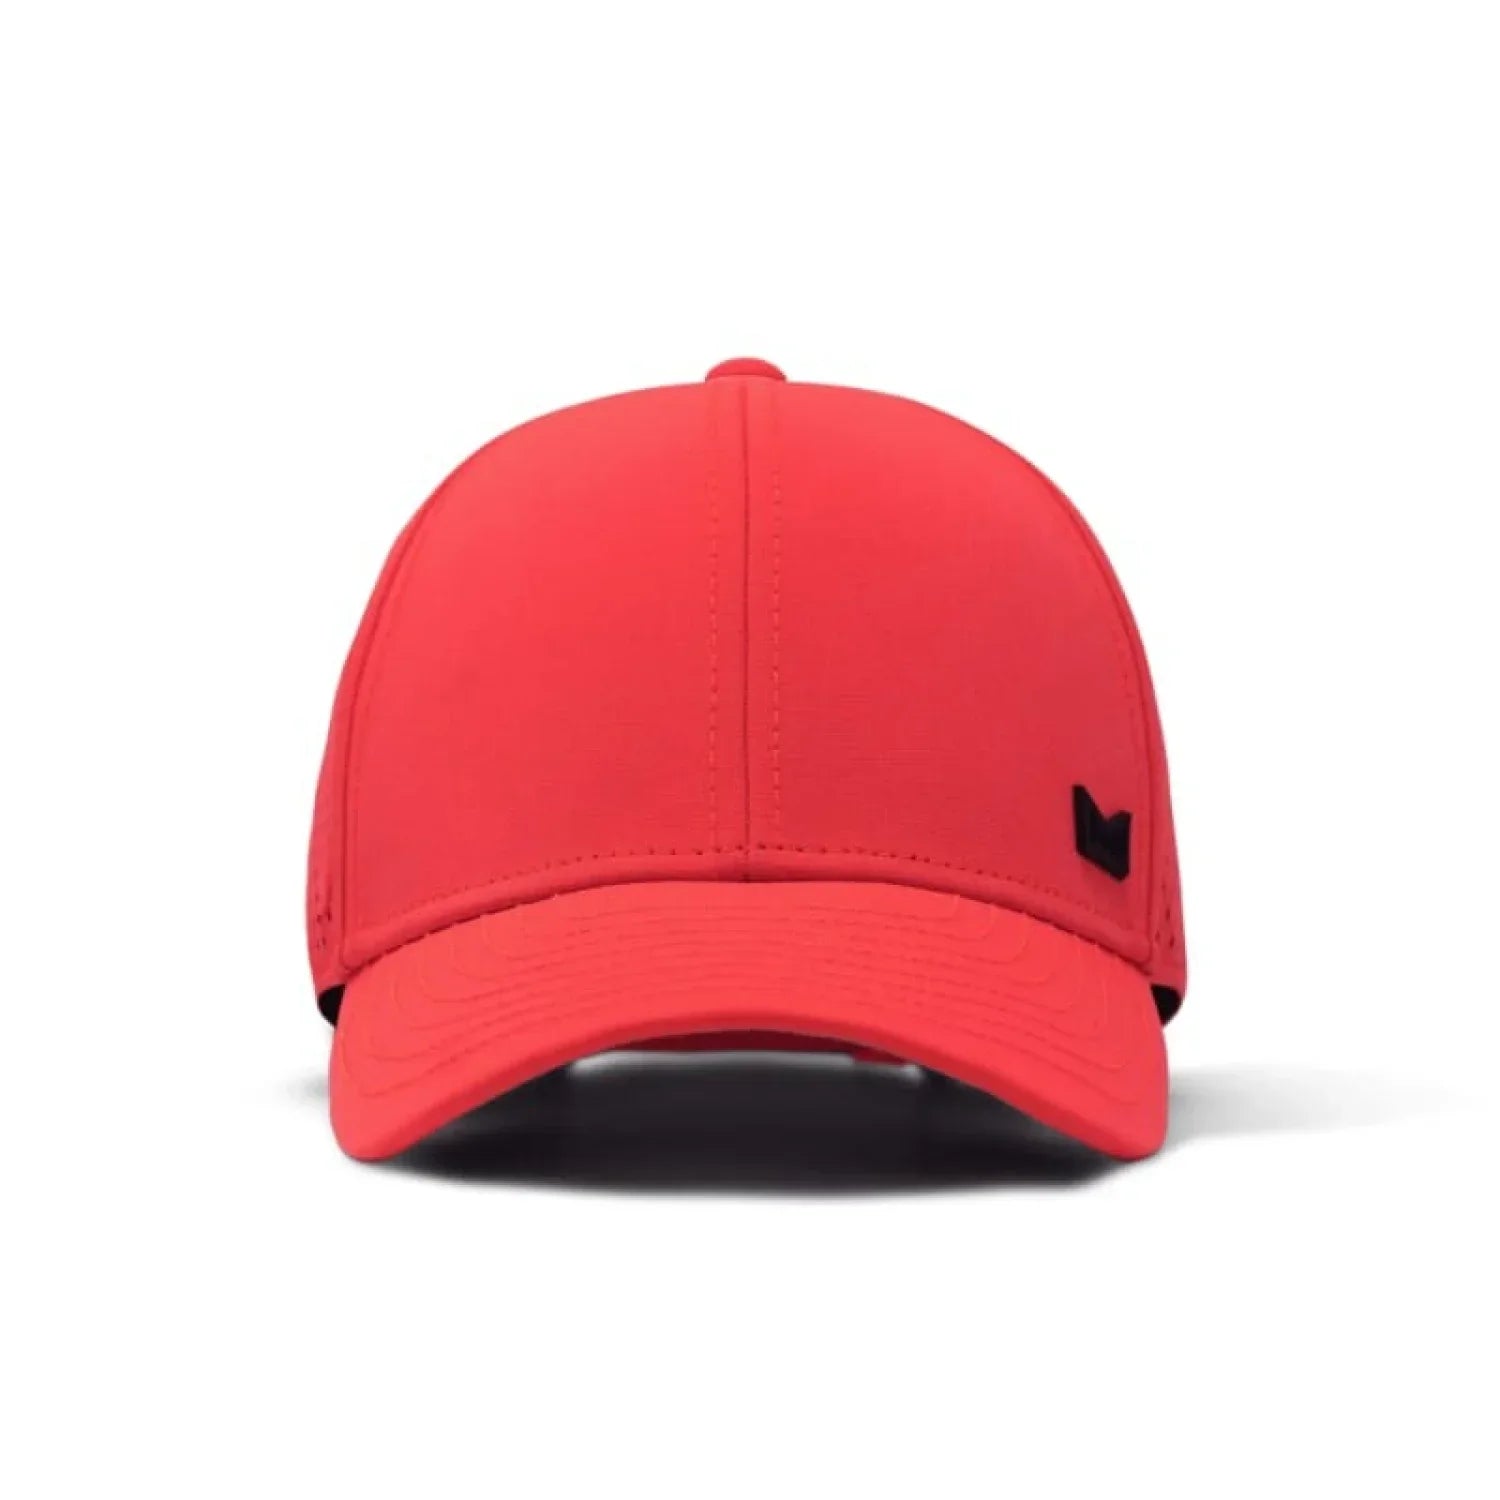 MELIN HATS - HATS BILLED - HATS BILLED Hydro A-Game Icon INFRARED CLASSIC